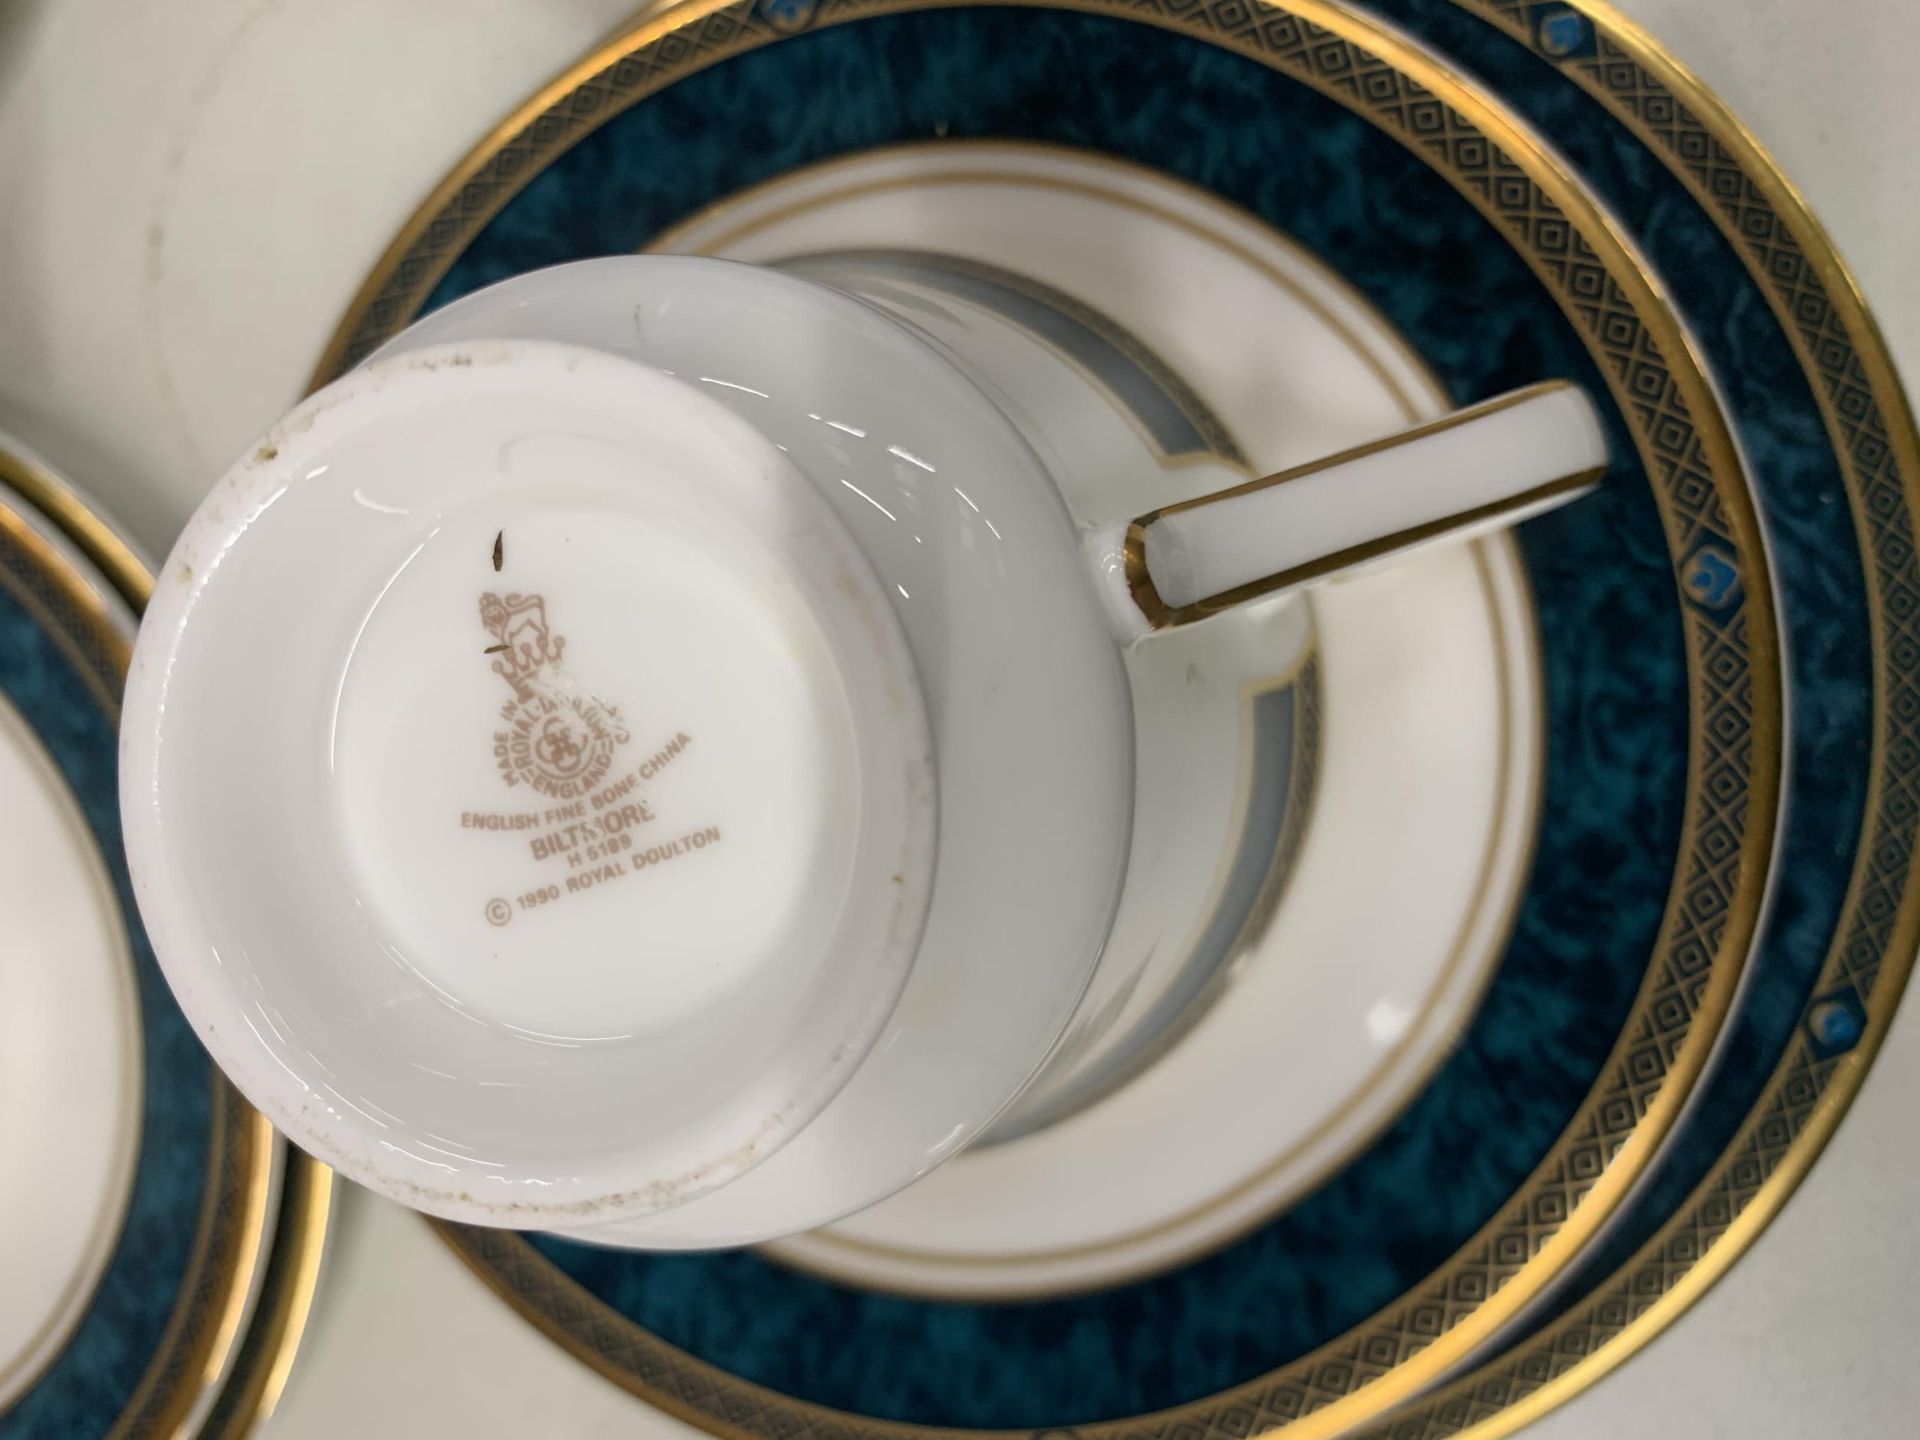 A QUANTITY OF ROYAL DOULTON TEAWARE TO INCLUDE 'CANTON', PLATES, A LARGE BOWL, PLANTER LIDDED - Image 3 of 7